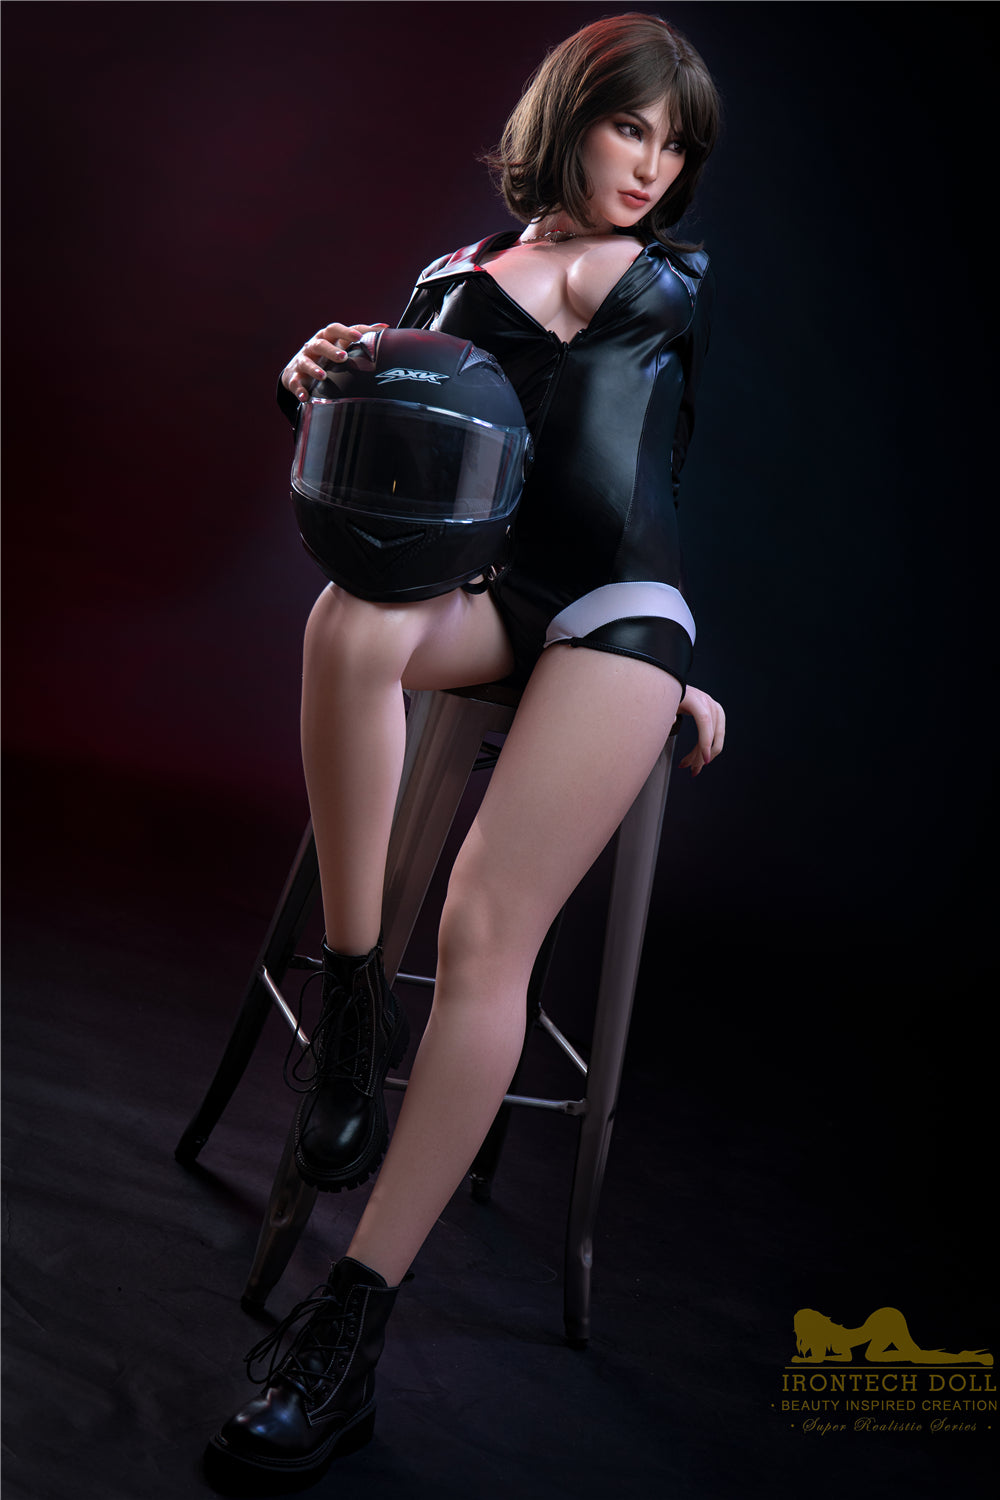 Irontech Doll 166 cm C Silicone - Catlin | Buy Sex Dolls at DOLLS ACTUALLY